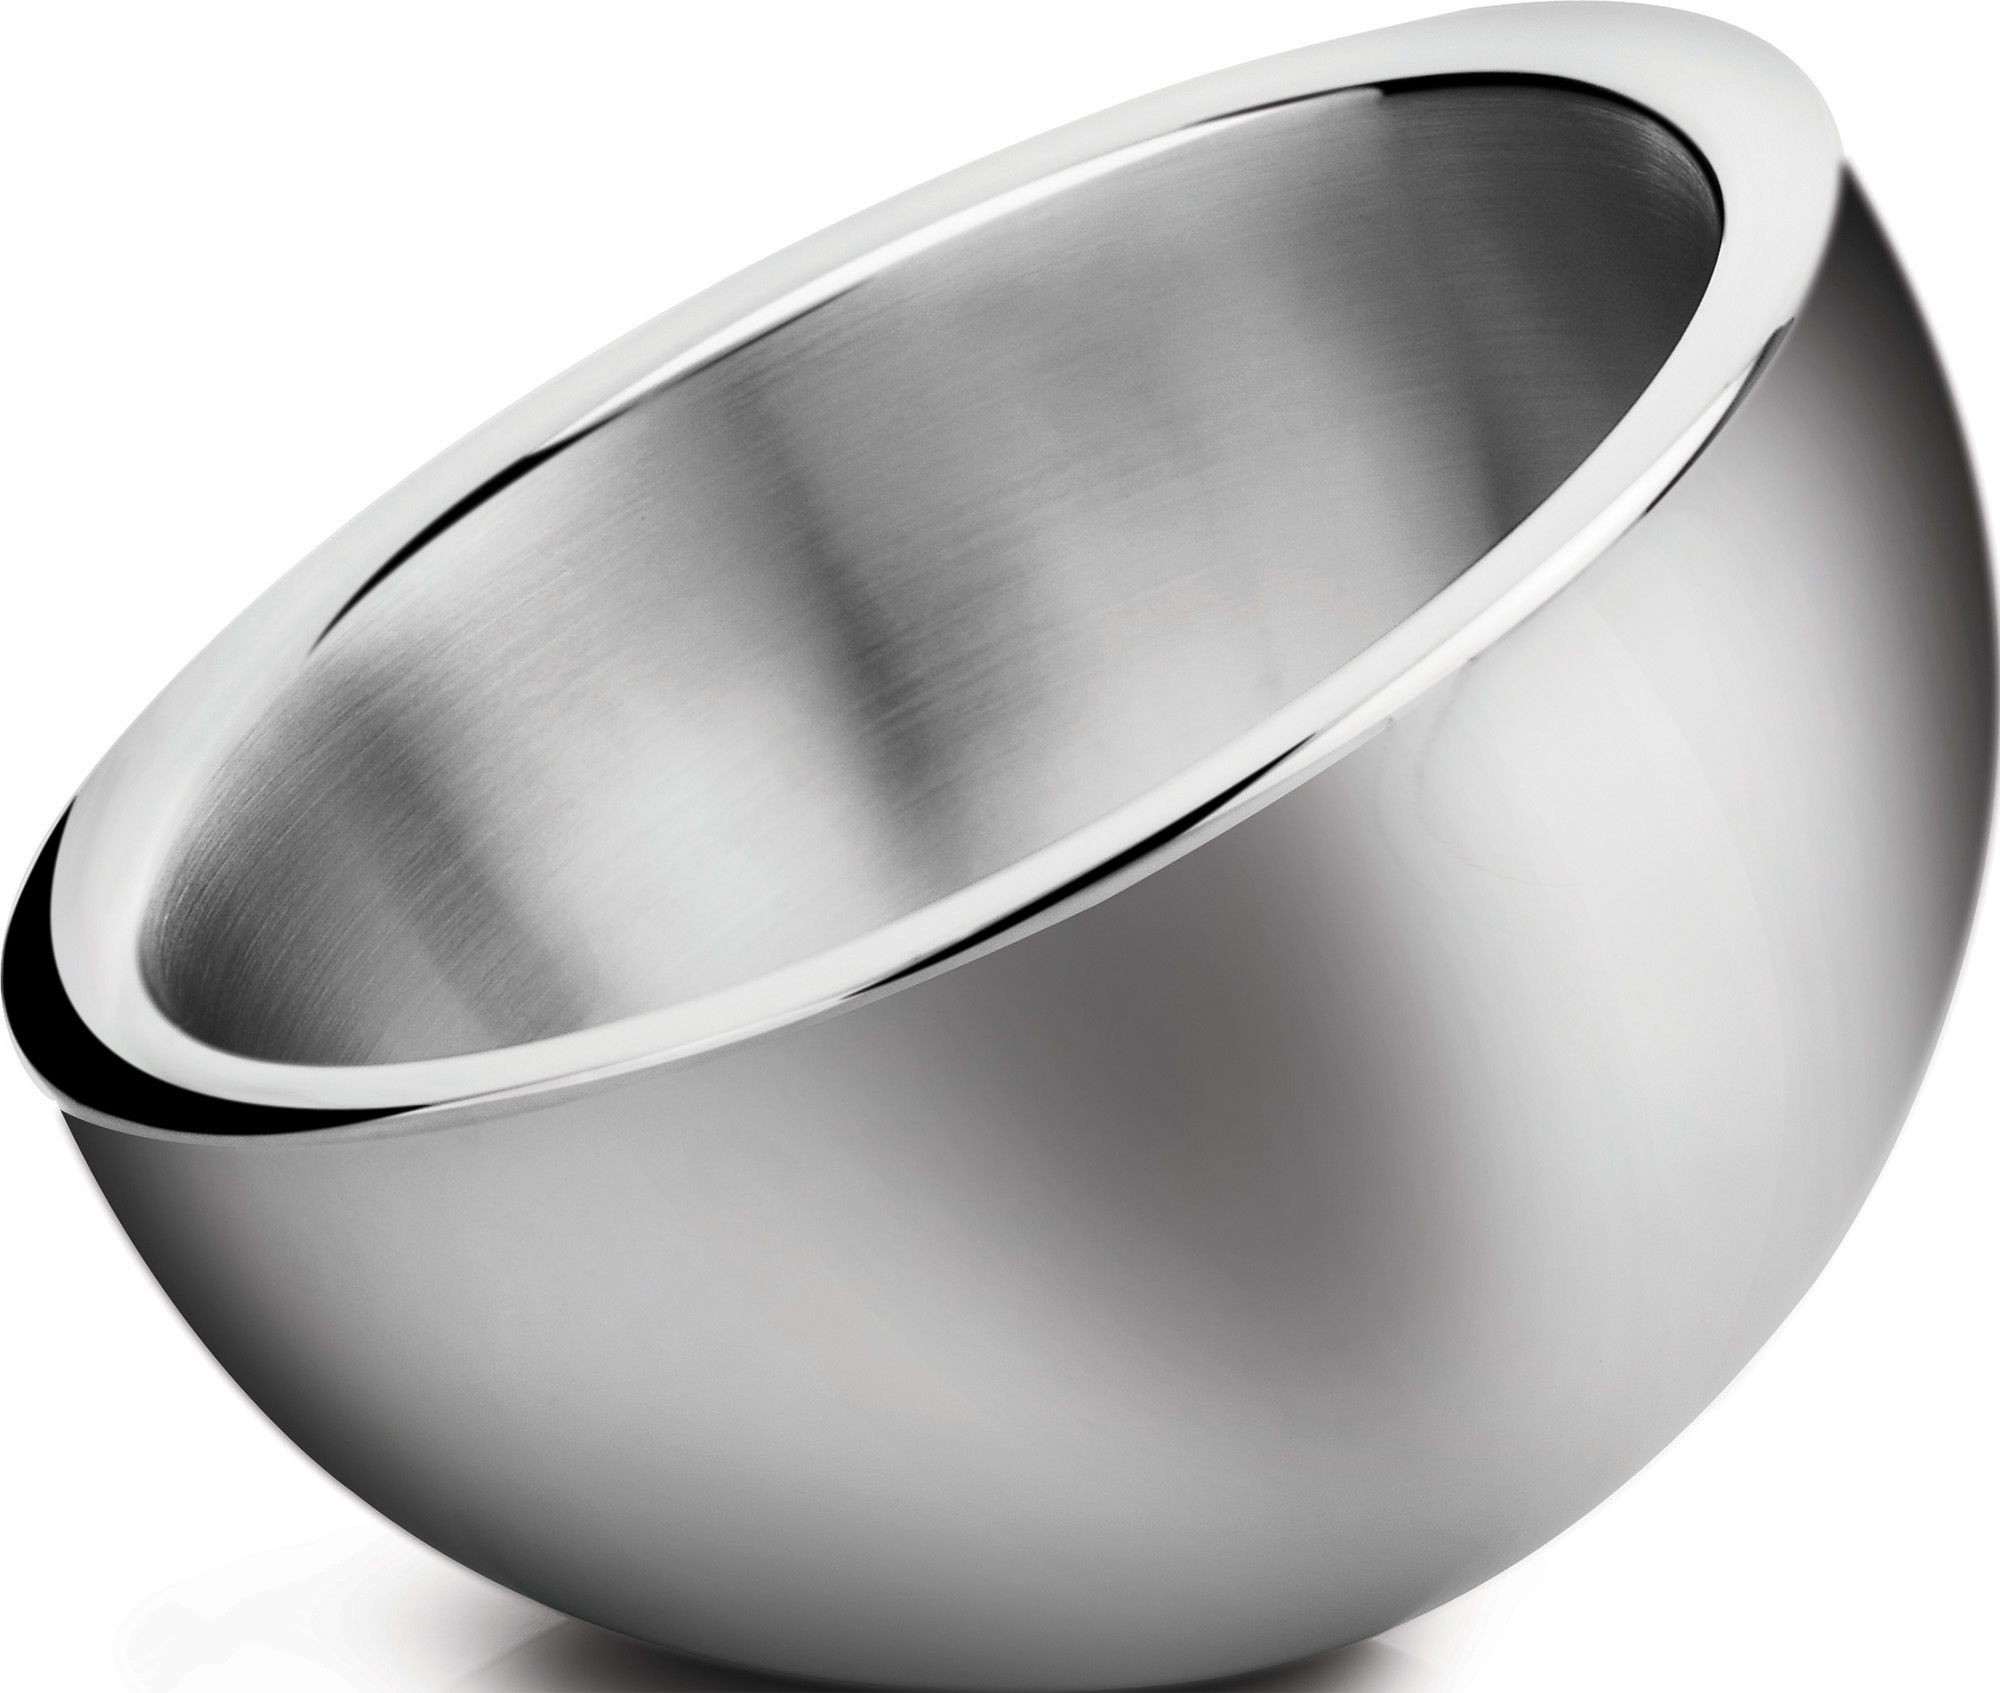 Winco DWAB-S 1-1/2 Qt. Stainless Steel Insulated Angled Display Bowl